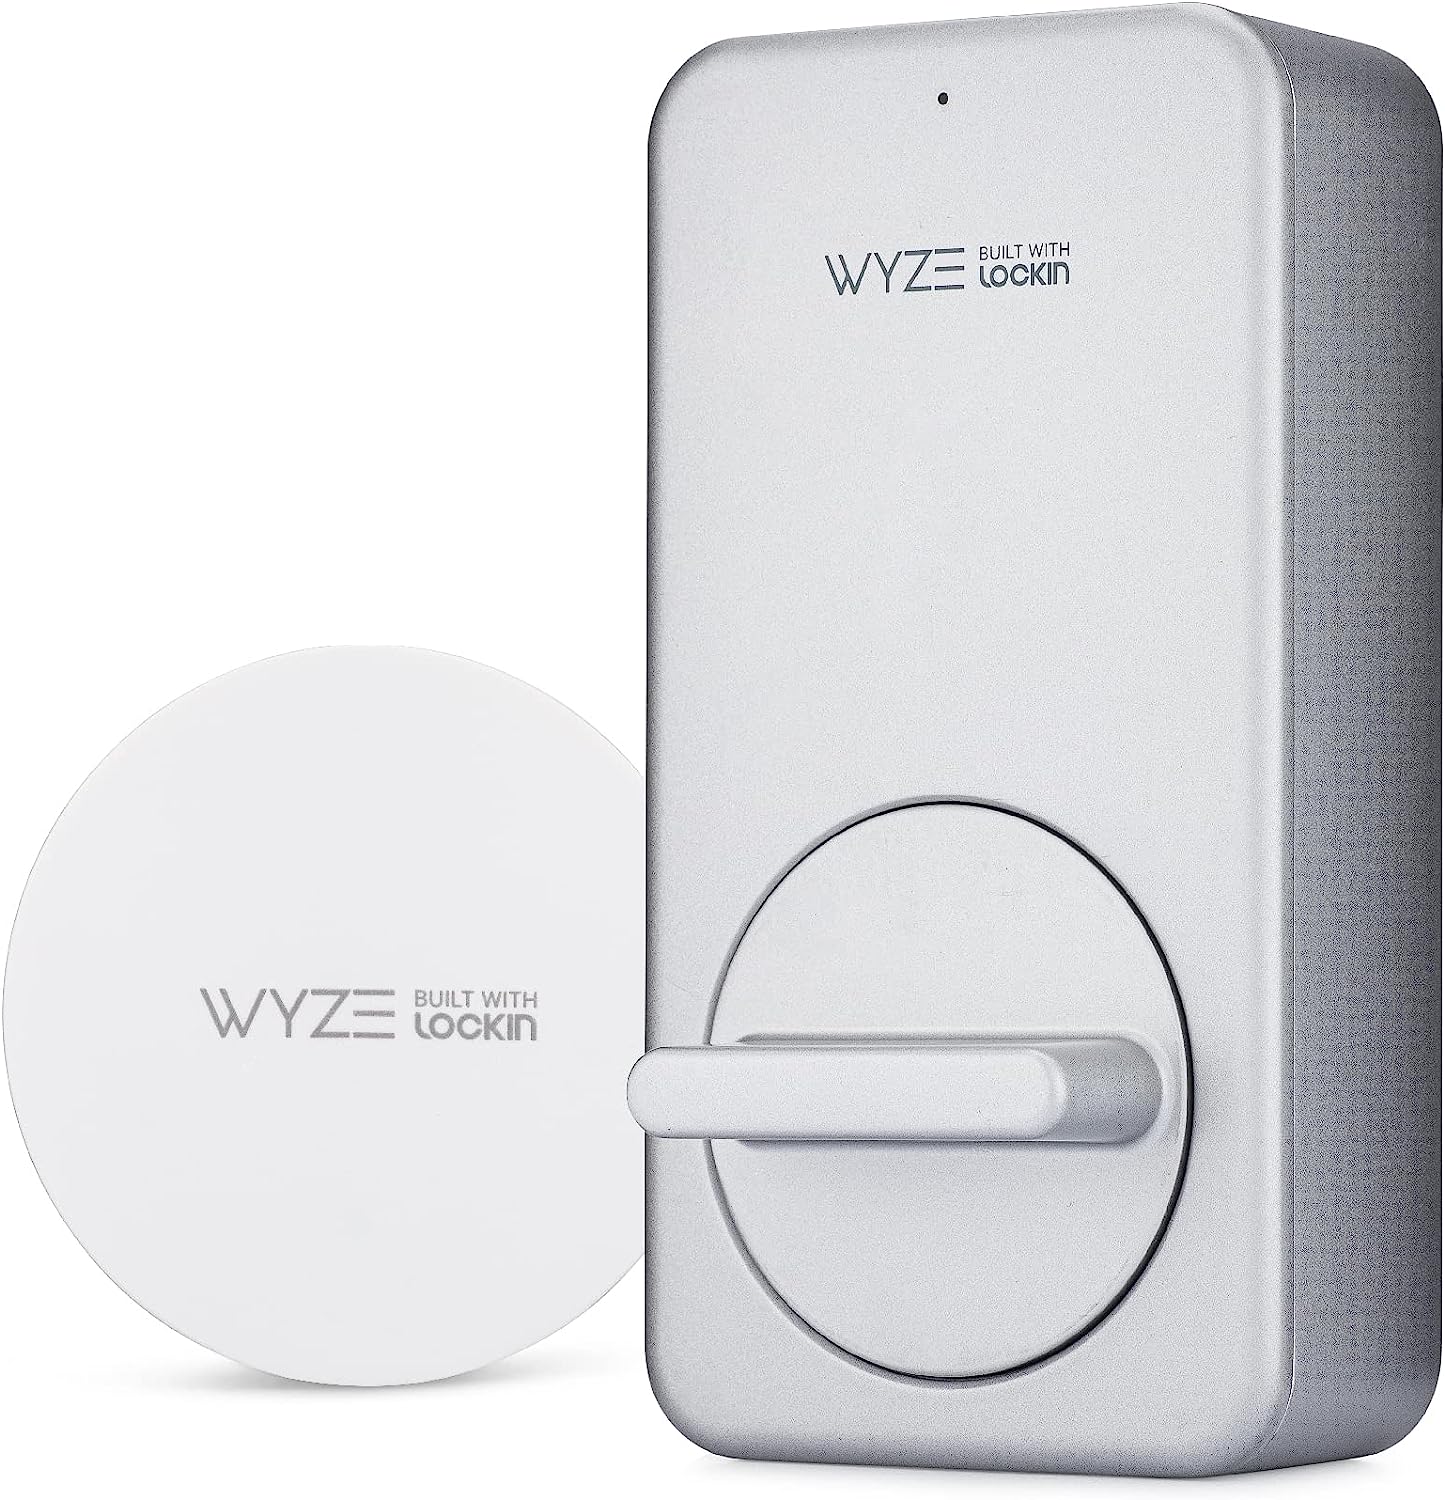 Wyze smart lock solutions for aging in place | AskSAMIE